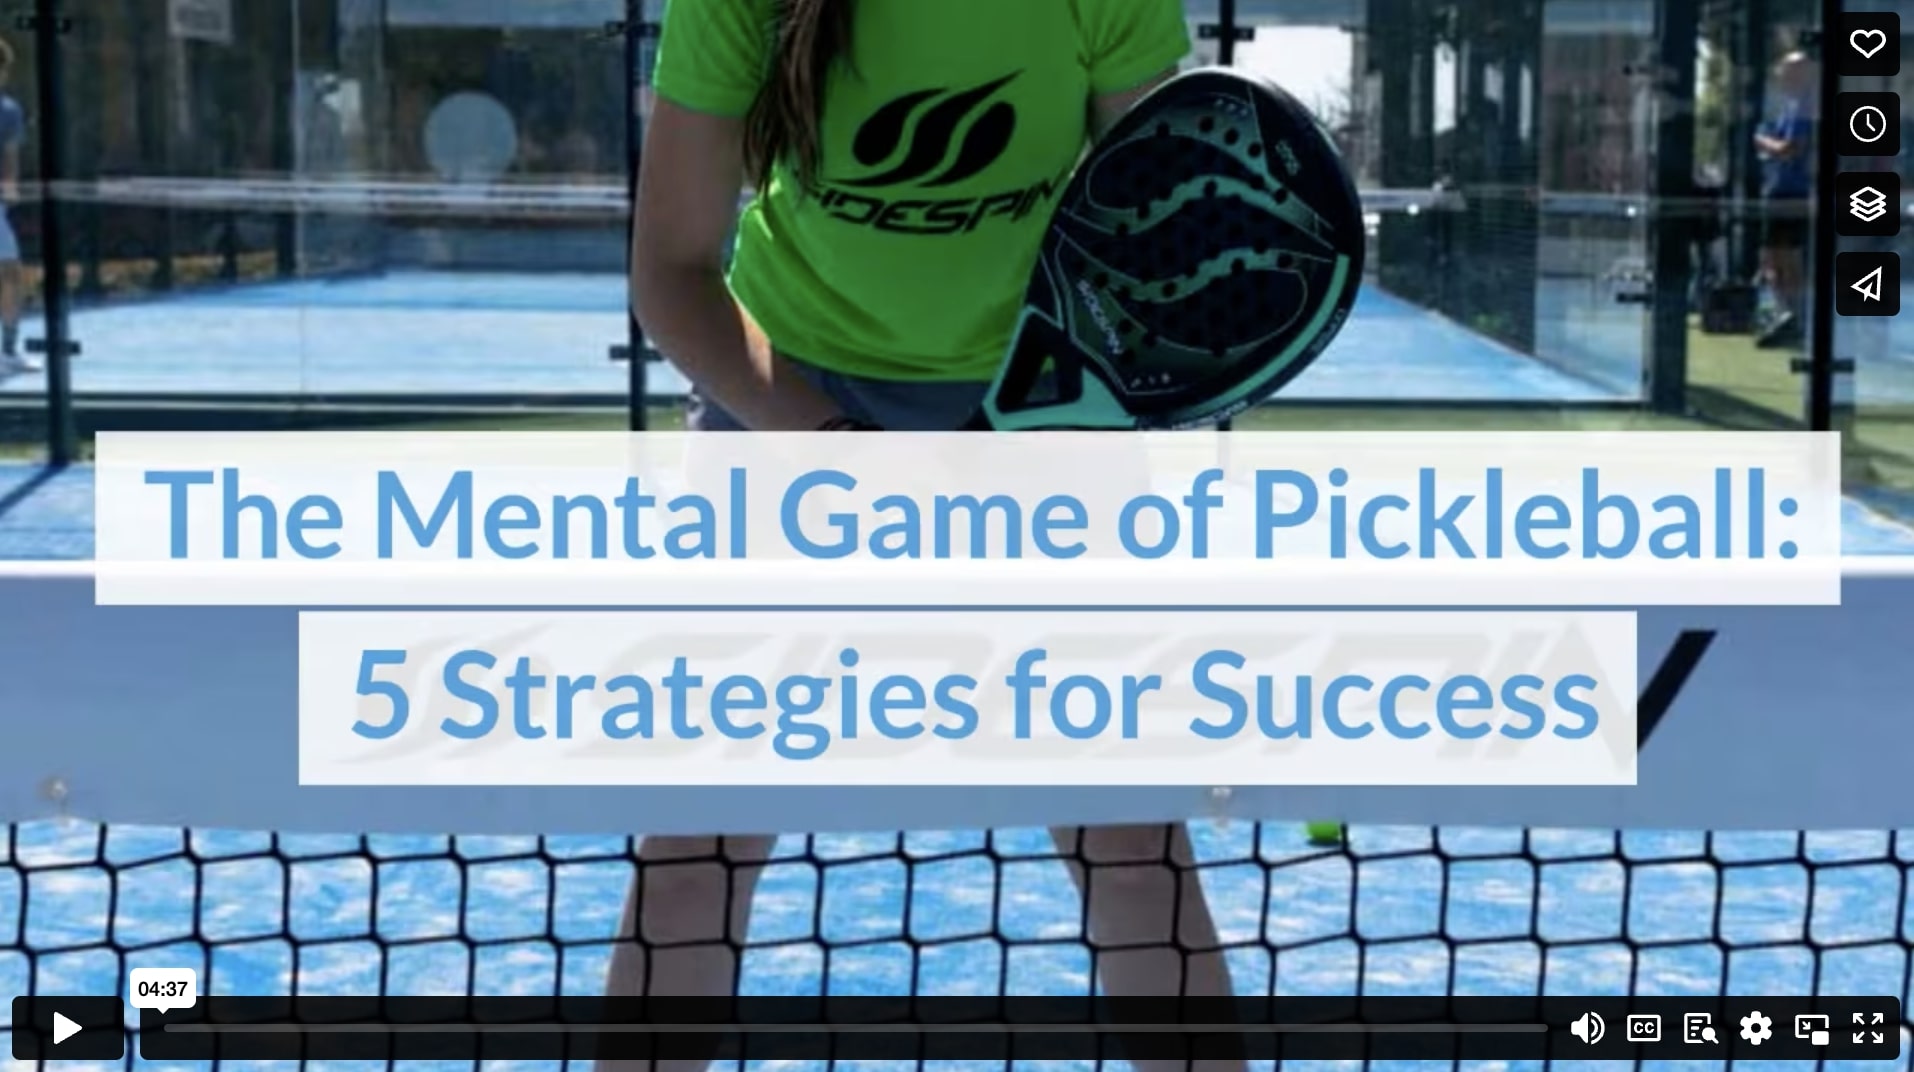 The Mental Game of Pickleball: 5 Strategies for Success